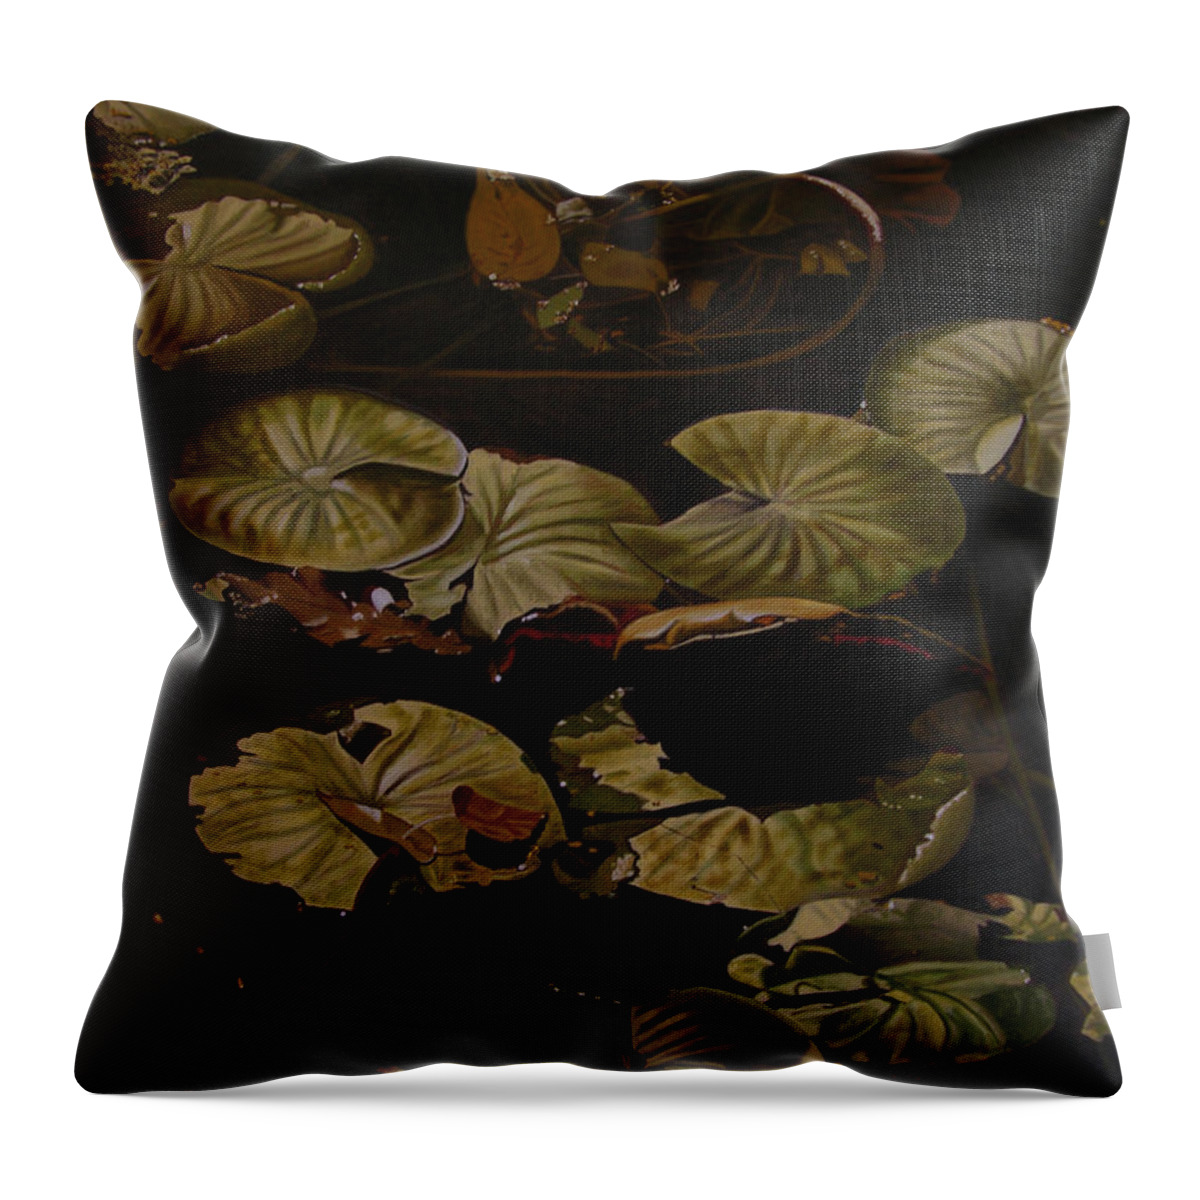 Lilypad Throw Pillow featuring the painting Lake Washington Lily Pad 9 by Thu Nguyen